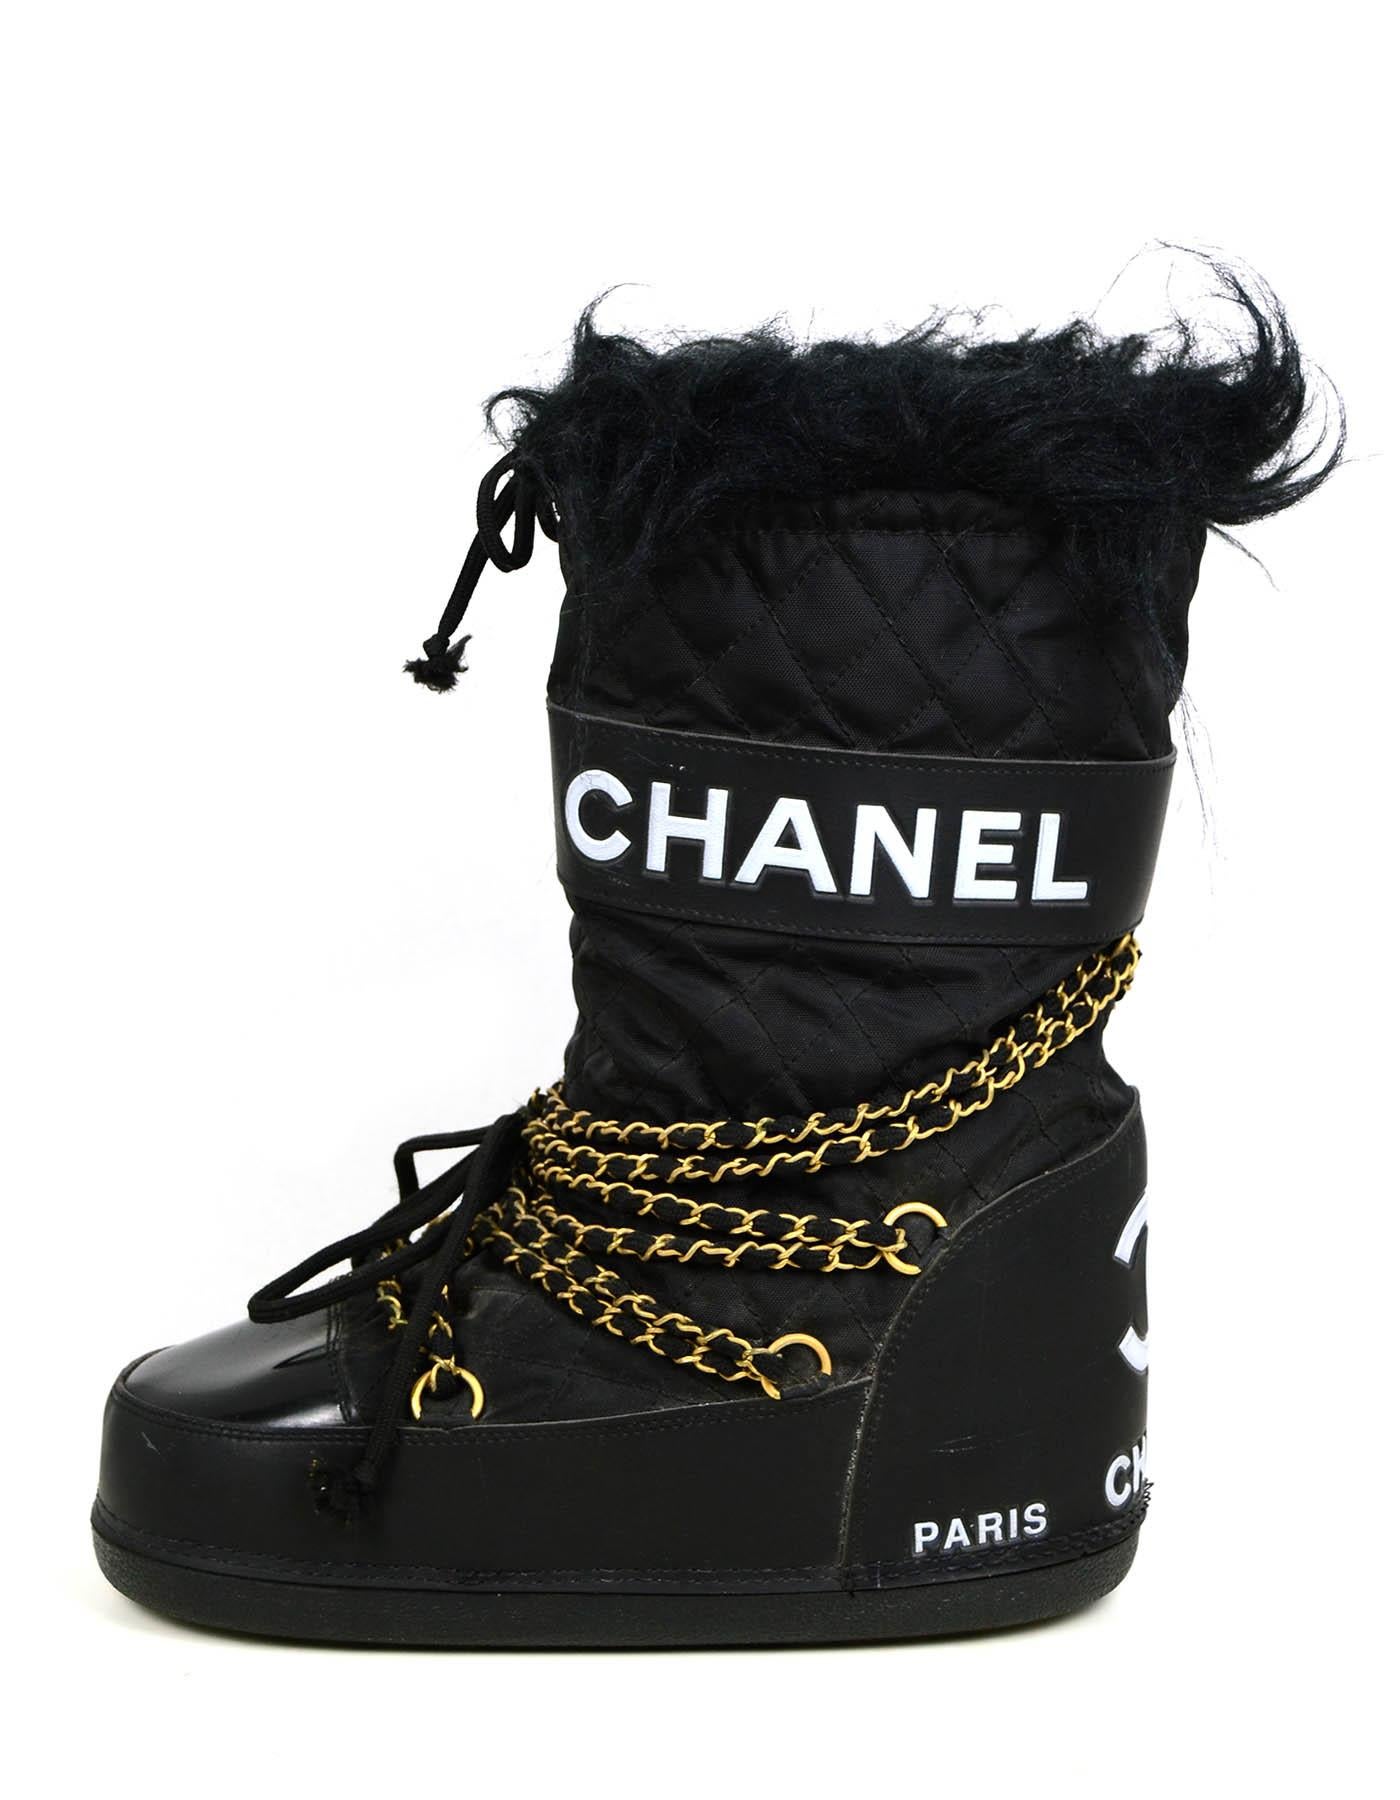 Chanel Iconic 90’s Moon Boots. Please note, the original lining was removed, and a new lining must be added for a proper fit.
Made In: Italy
Year of Production: 1990’s
Color:Black
Hardware: Goldtone chain
Materials: Quilted nylon, rubber, faux